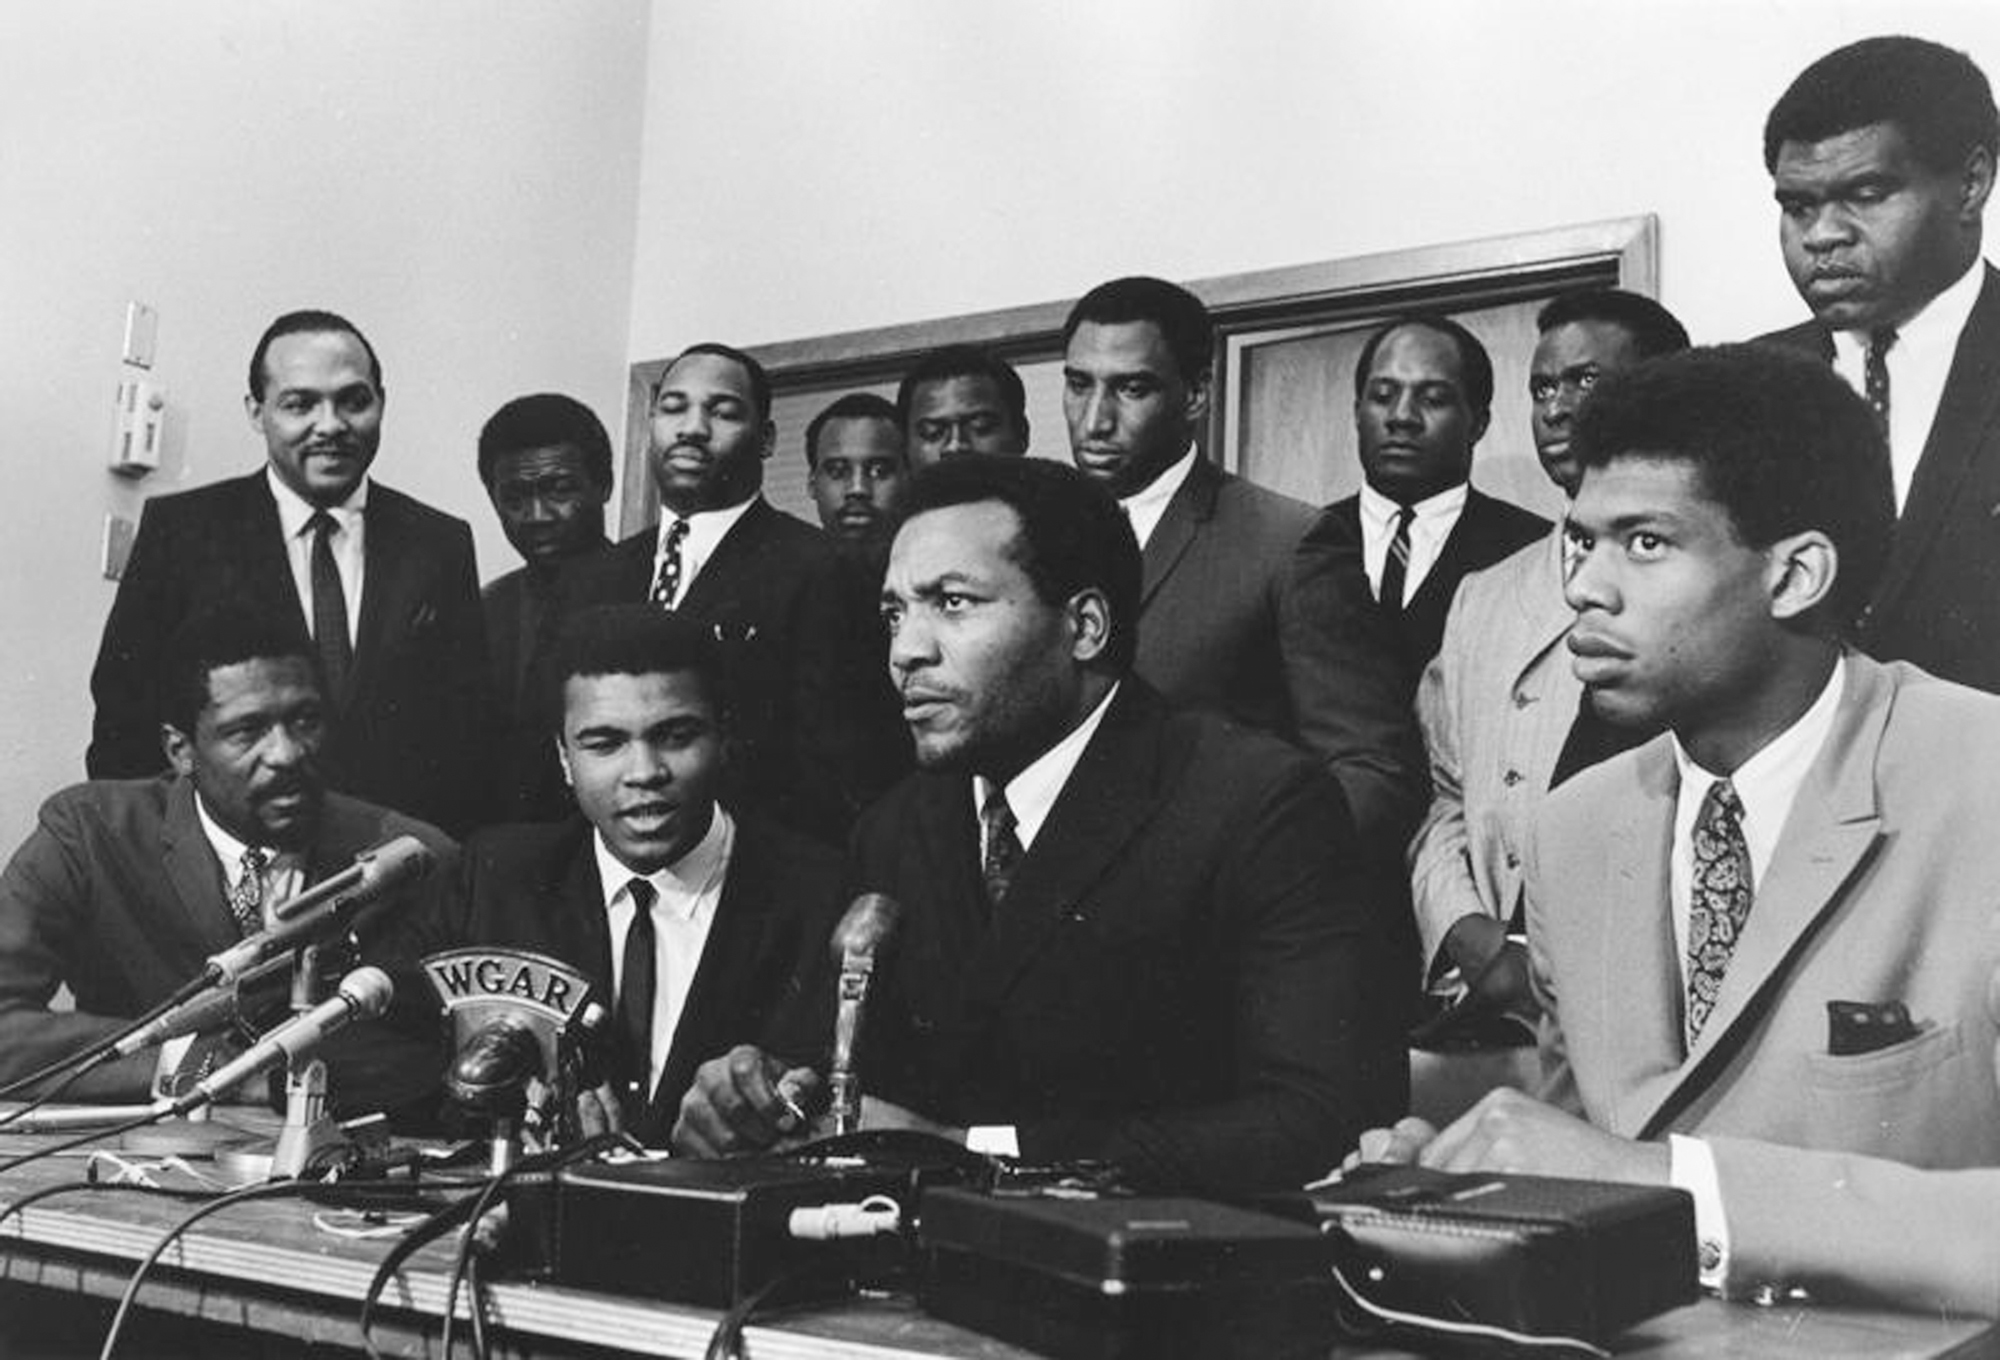 Muhammad Ali defending refusal to be drafted, 1967